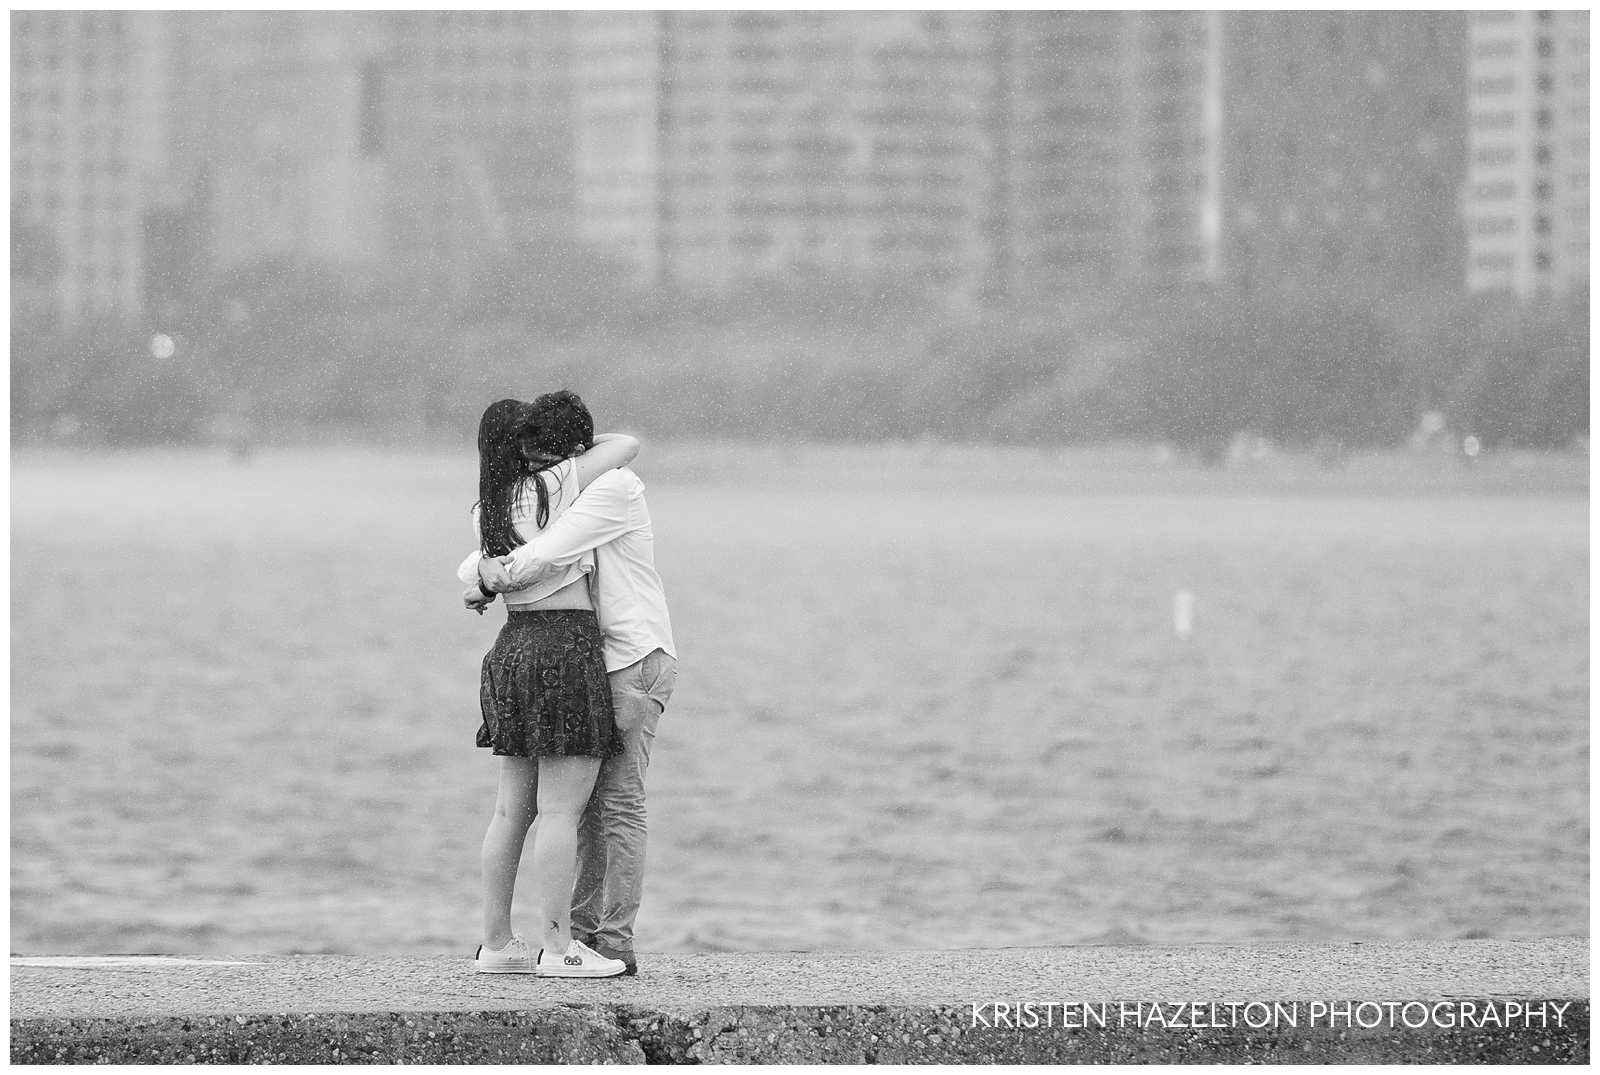 Man hugging his new fiancee during a rainstorm